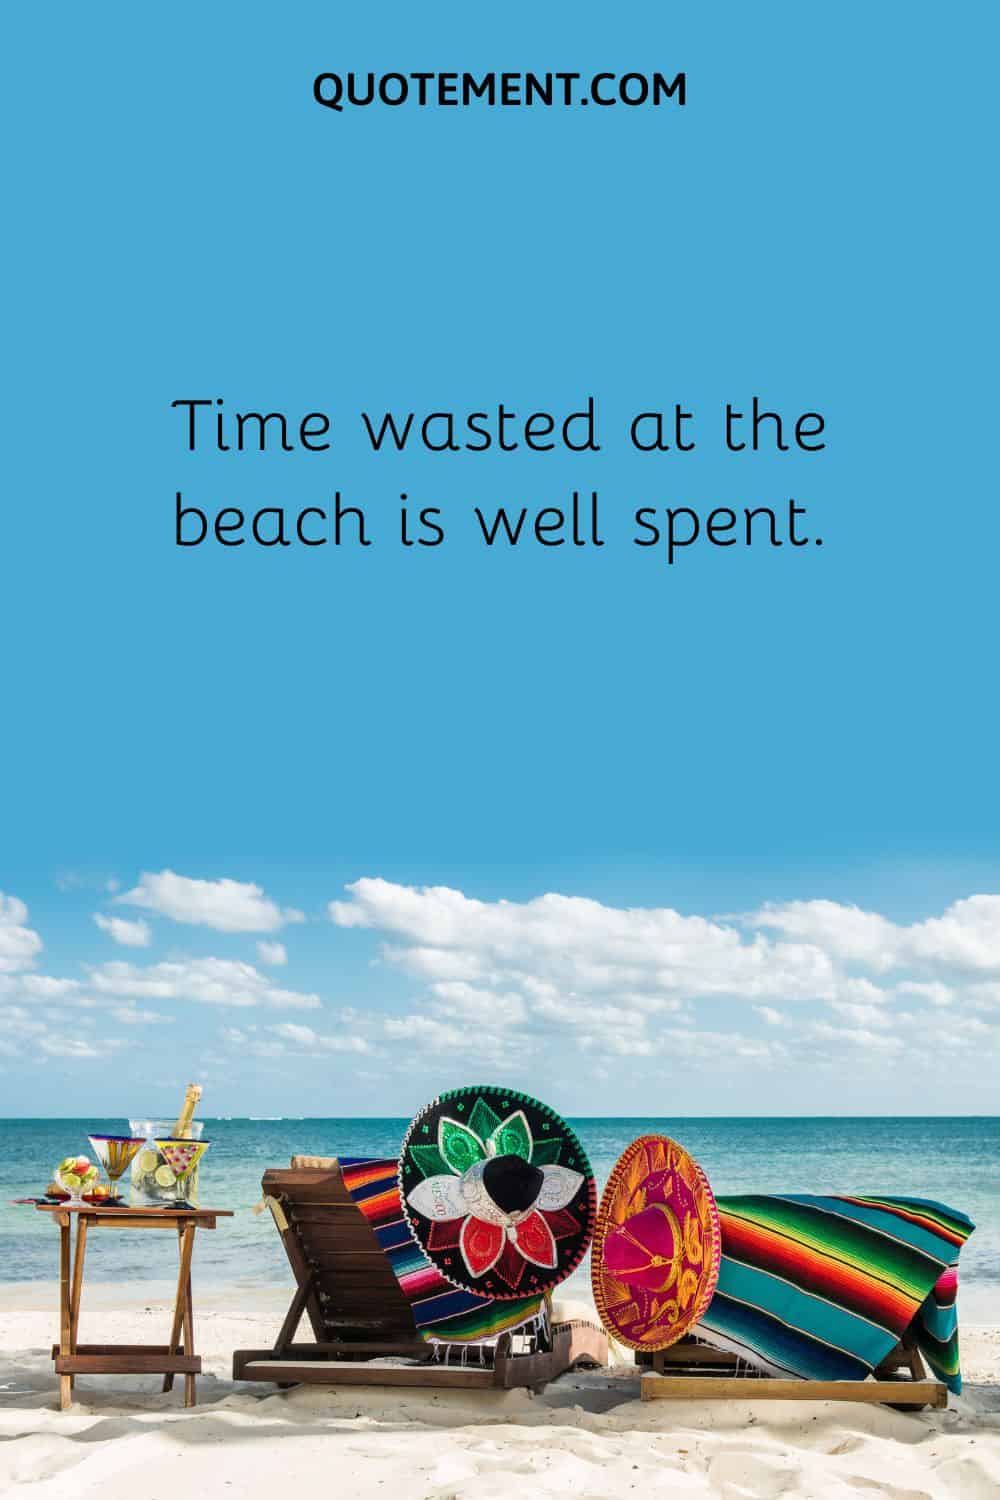  Time wasted at the beach is well spent